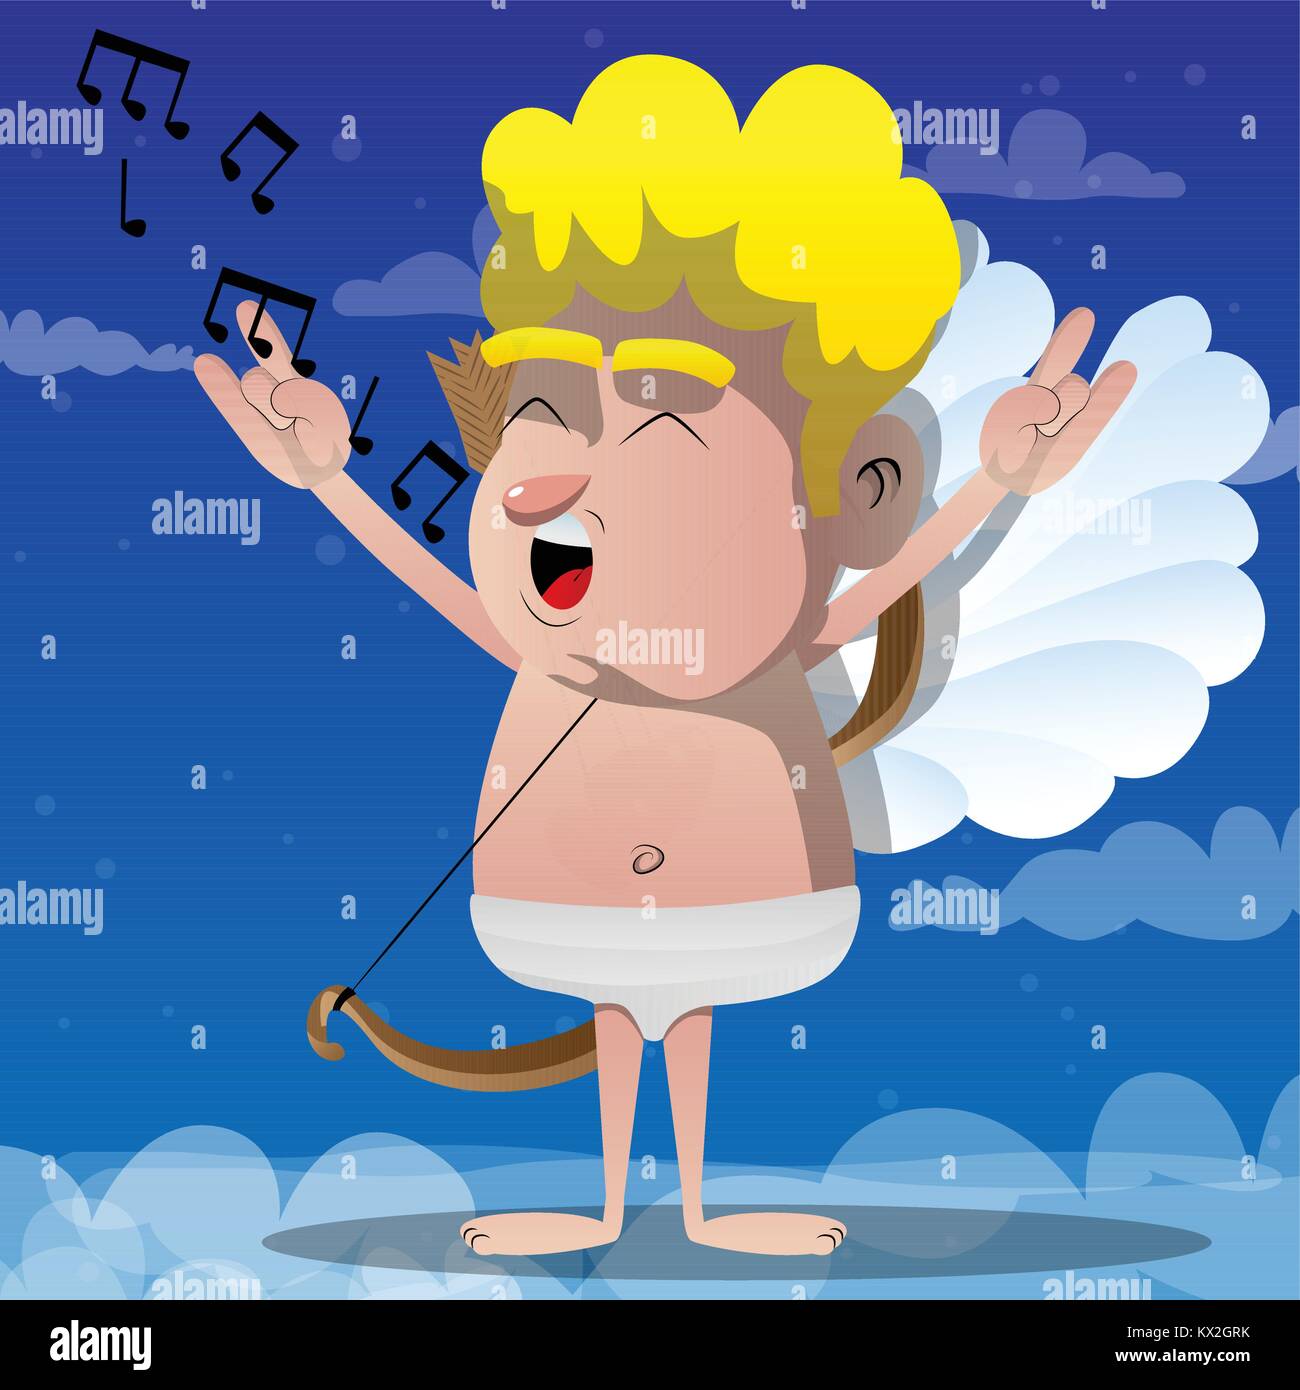 Cupid singing with hands in rocker pose. Vector cartoon character illustration. Stock Vector